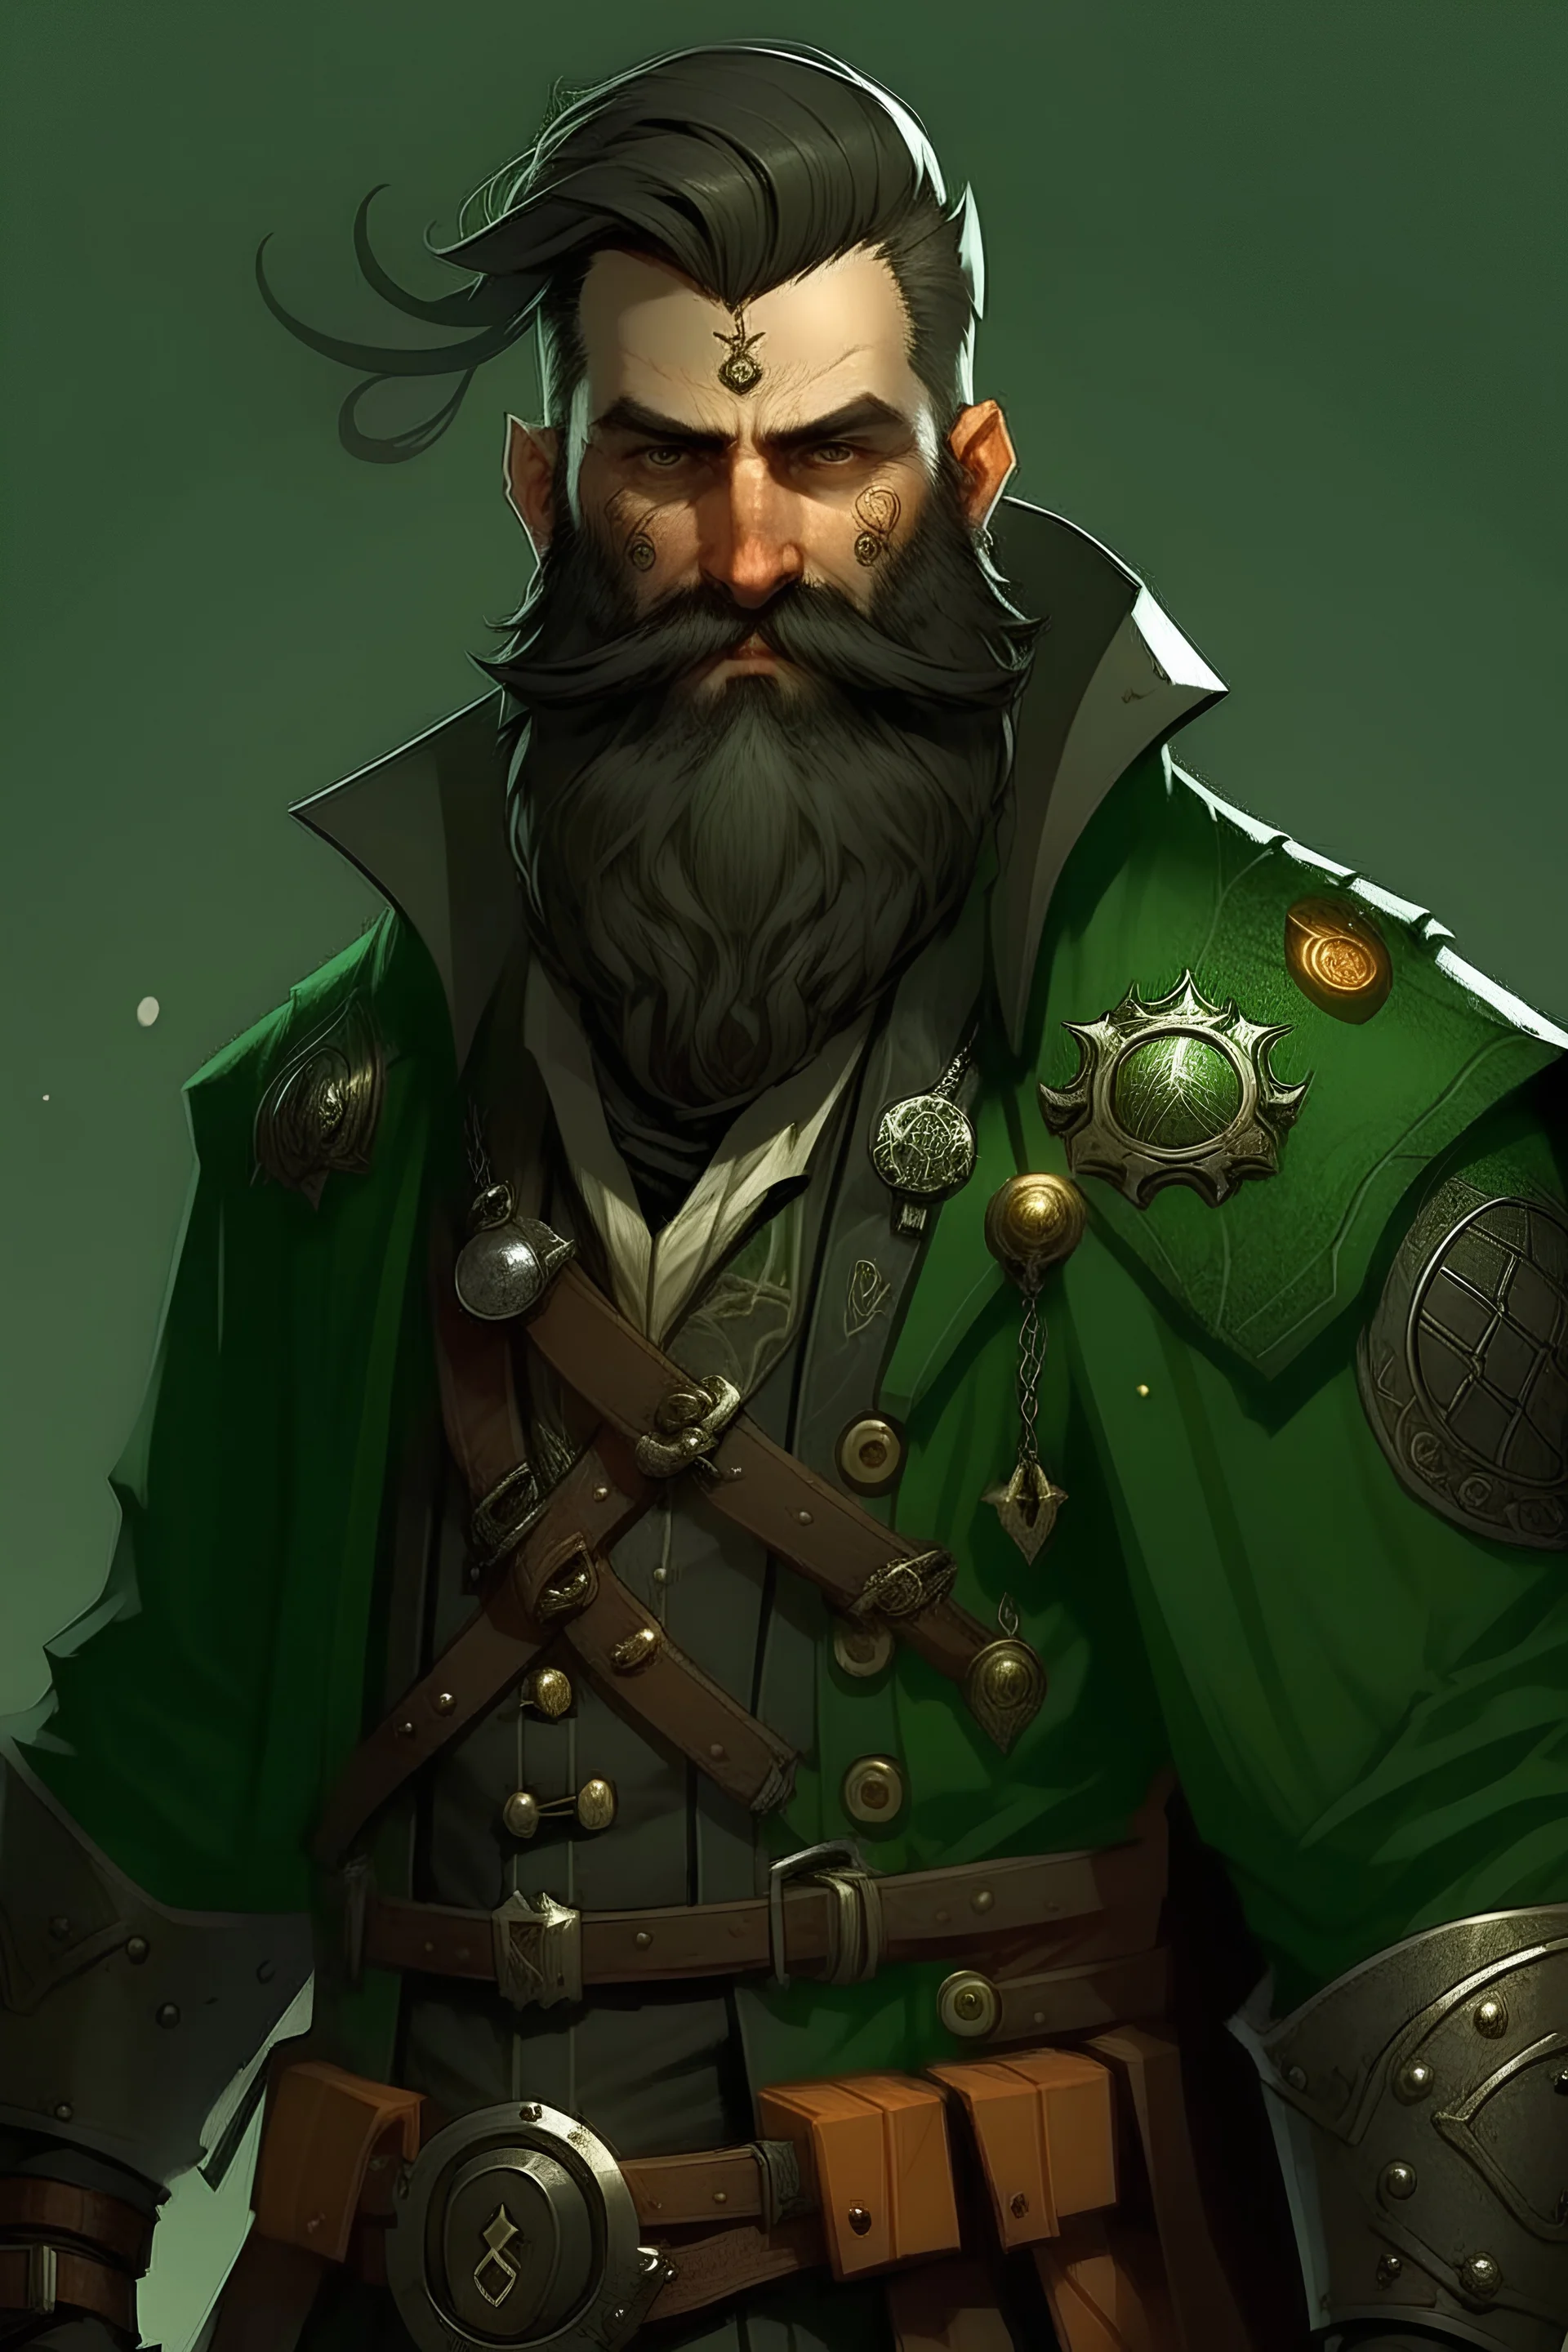 @Al3x He is a steampunk druid with a short and black haircut. He has a leather armor, a green coat with a good. He has a scimitar. He has a long beard.